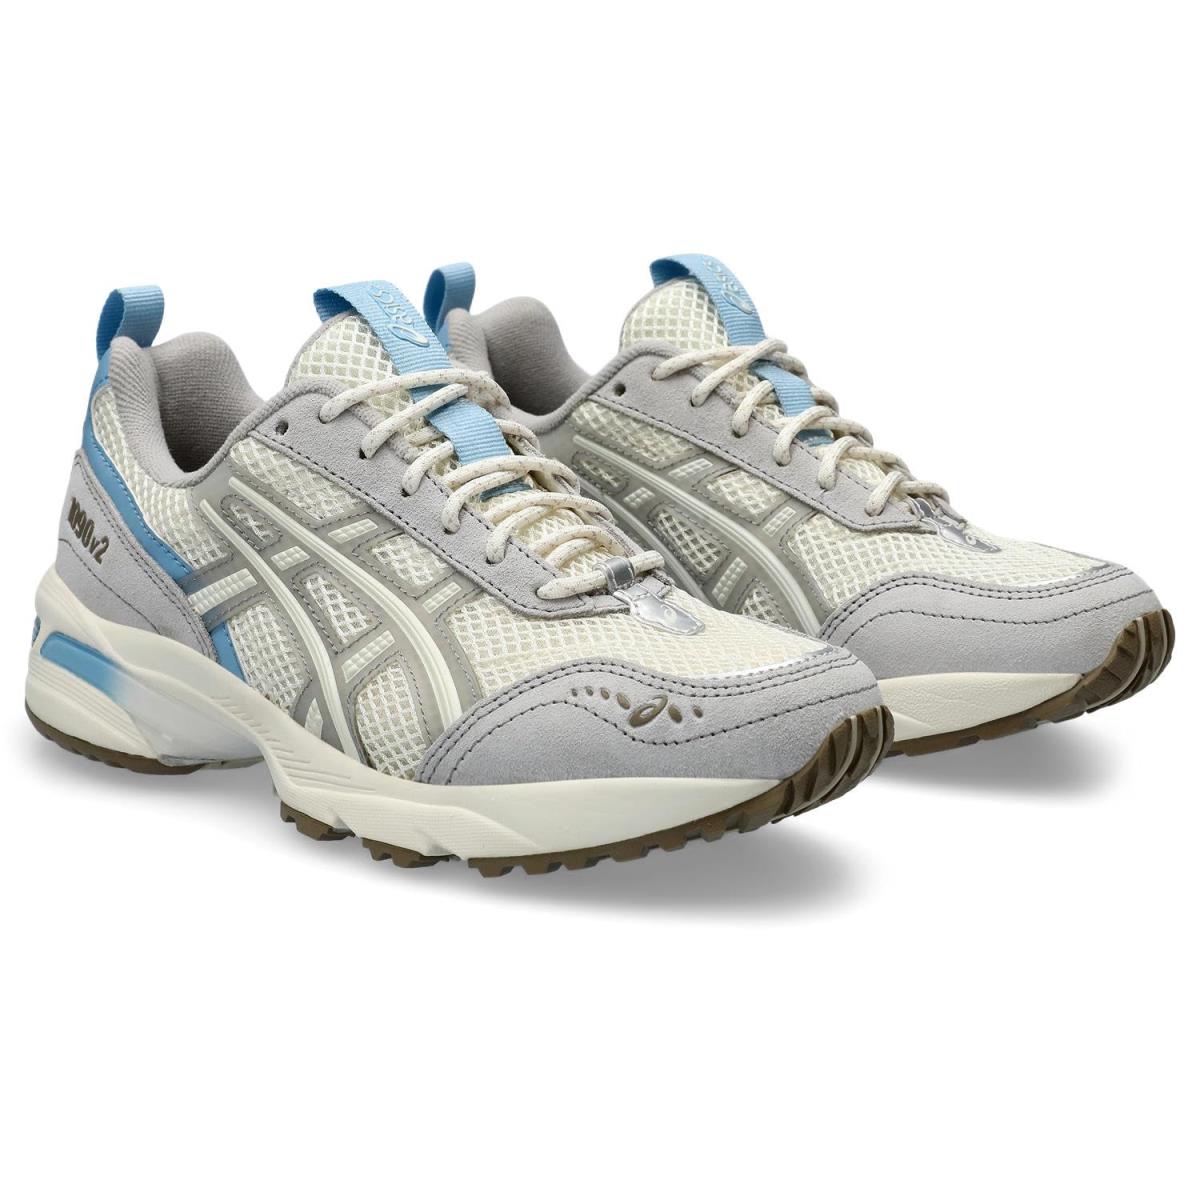 Woman`s Sneakers Athletic Shoes Asics Sportstyle GEL-1090V2 Cream/Cement Grey